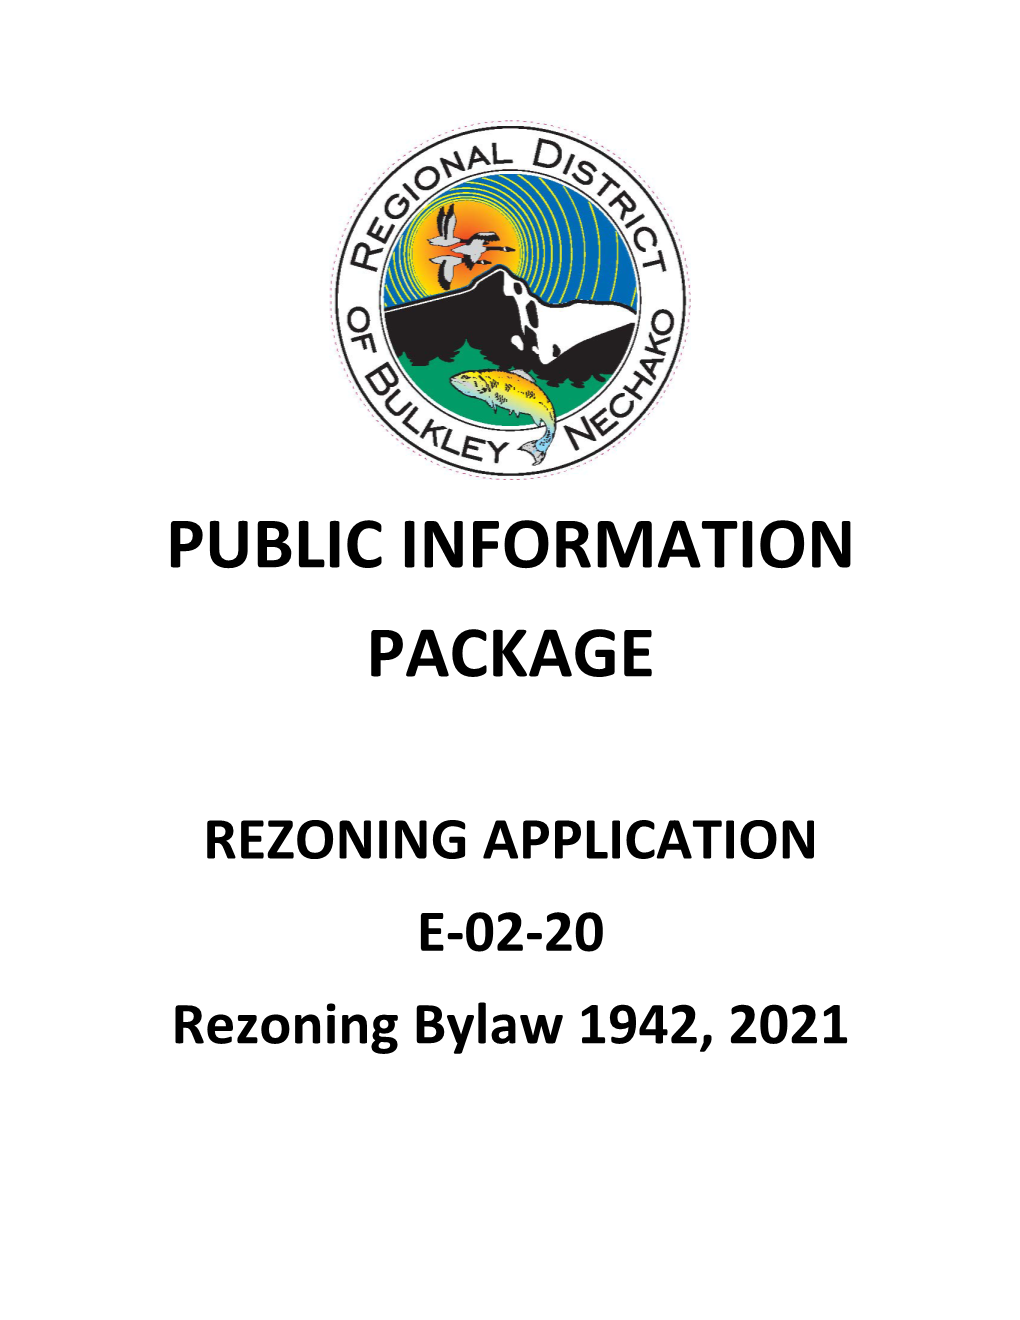 Public Information Package